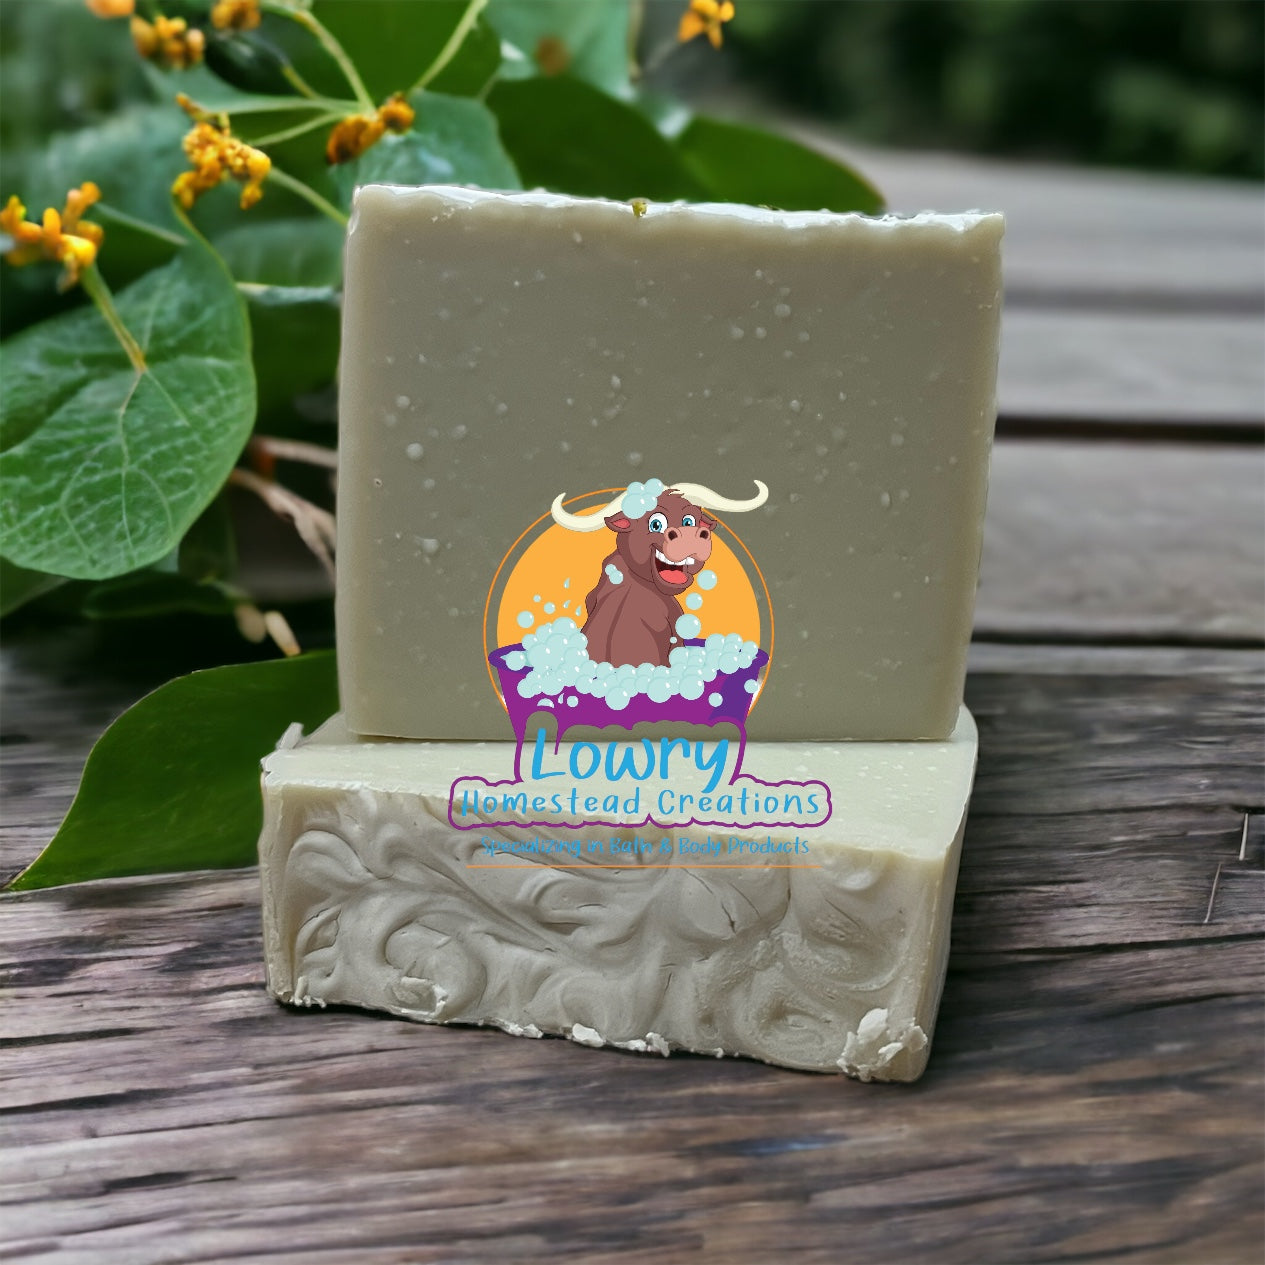 Jewelweed Unscented Bar Soap